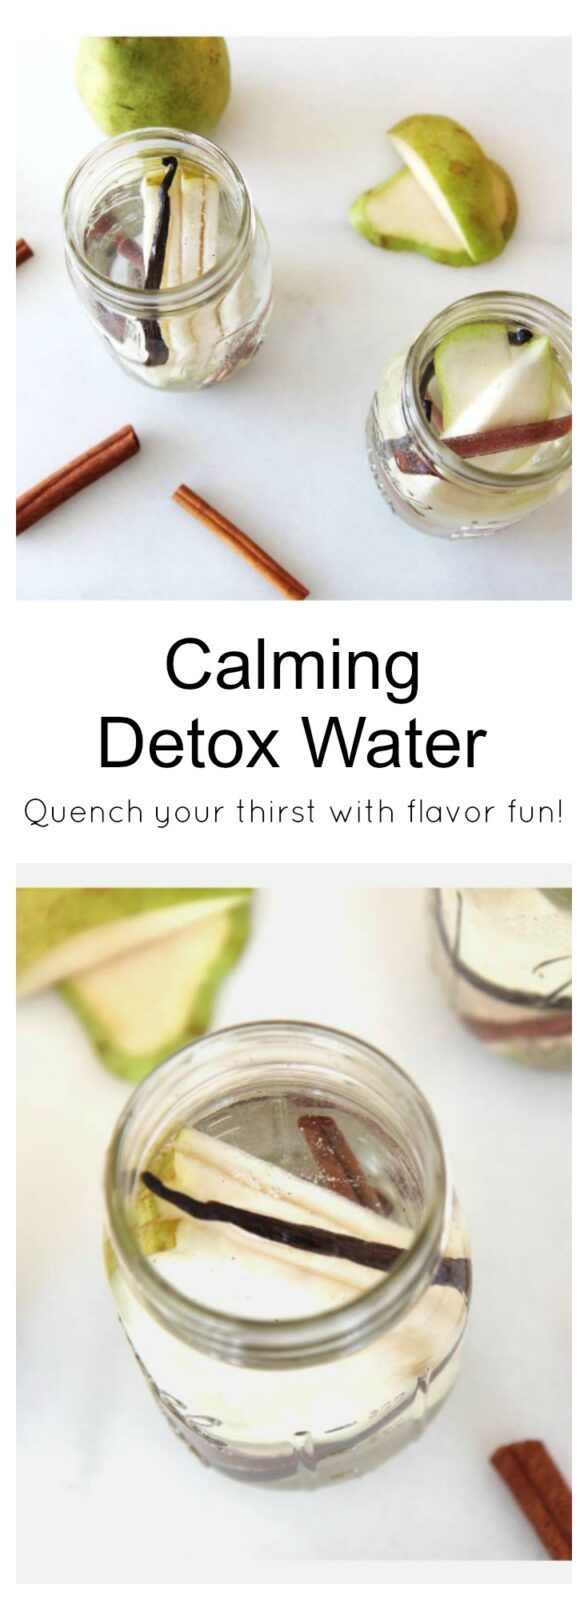 Calming Detox Water Recipe that is as tasty as it is healthy for you. You will make this your new favorite drink. ChopHappy.com